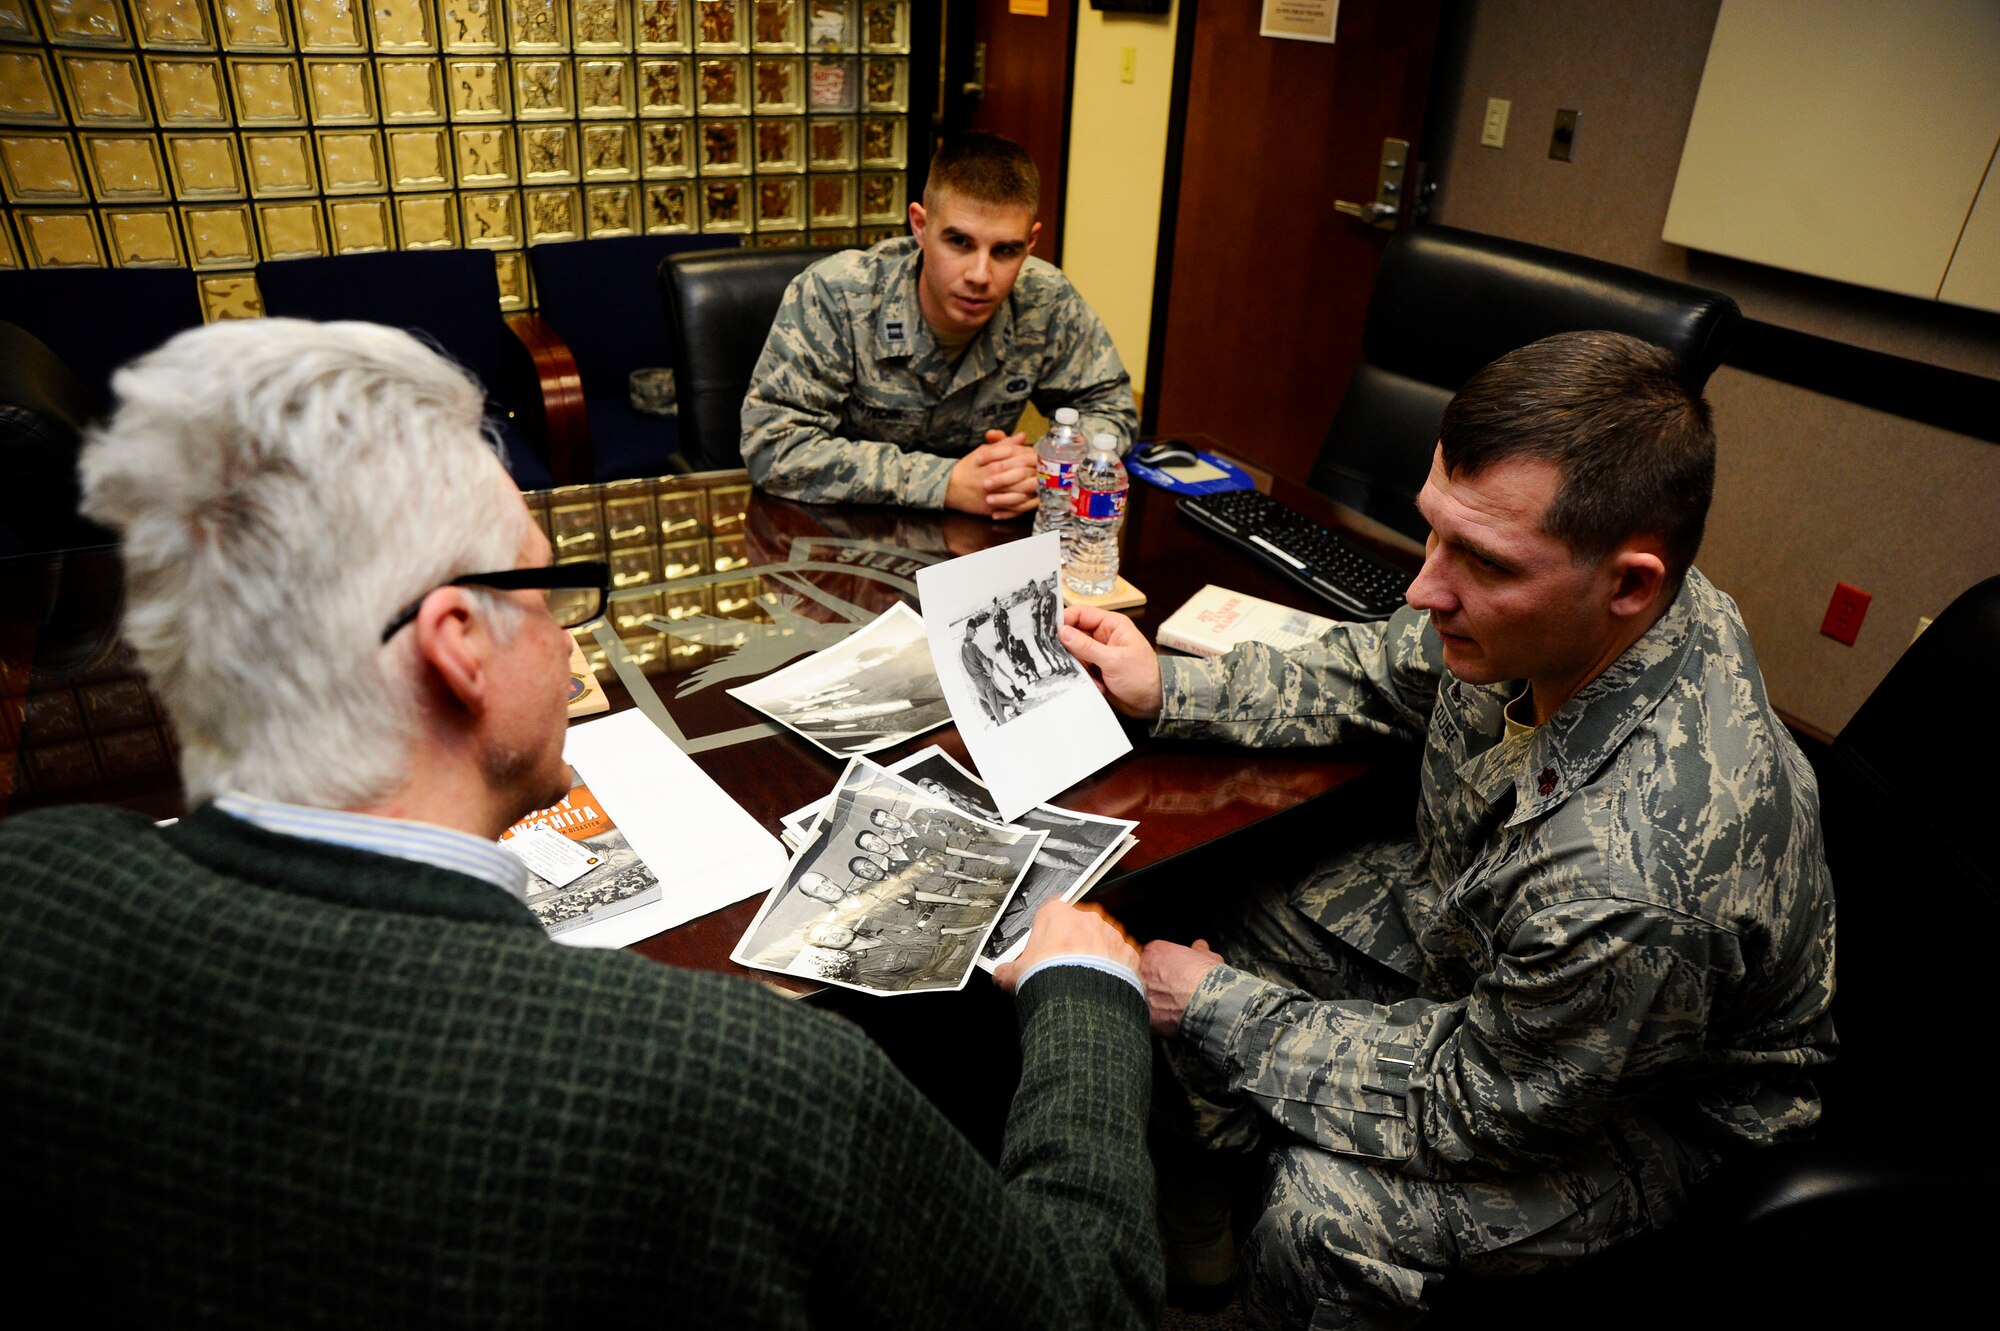 (From right) Maj. Robert Clouse, 22nd Security Forces Squadron commander, and Capt. Thomas Matechik, 22nd SFS operations officer, discuss photos from the Vietnam War with Stephen Carlton, Jan. 15, 2014, at McConnell Air Force Base, Kan. Carlton, a former McConnell air police lieutenant in the 1960s, received the opportunity to meet with current security forces Airmen and share his experiences from his time in the Air Force. (U.S. Air Force photo/Senior Airman Victor J. Caputo)